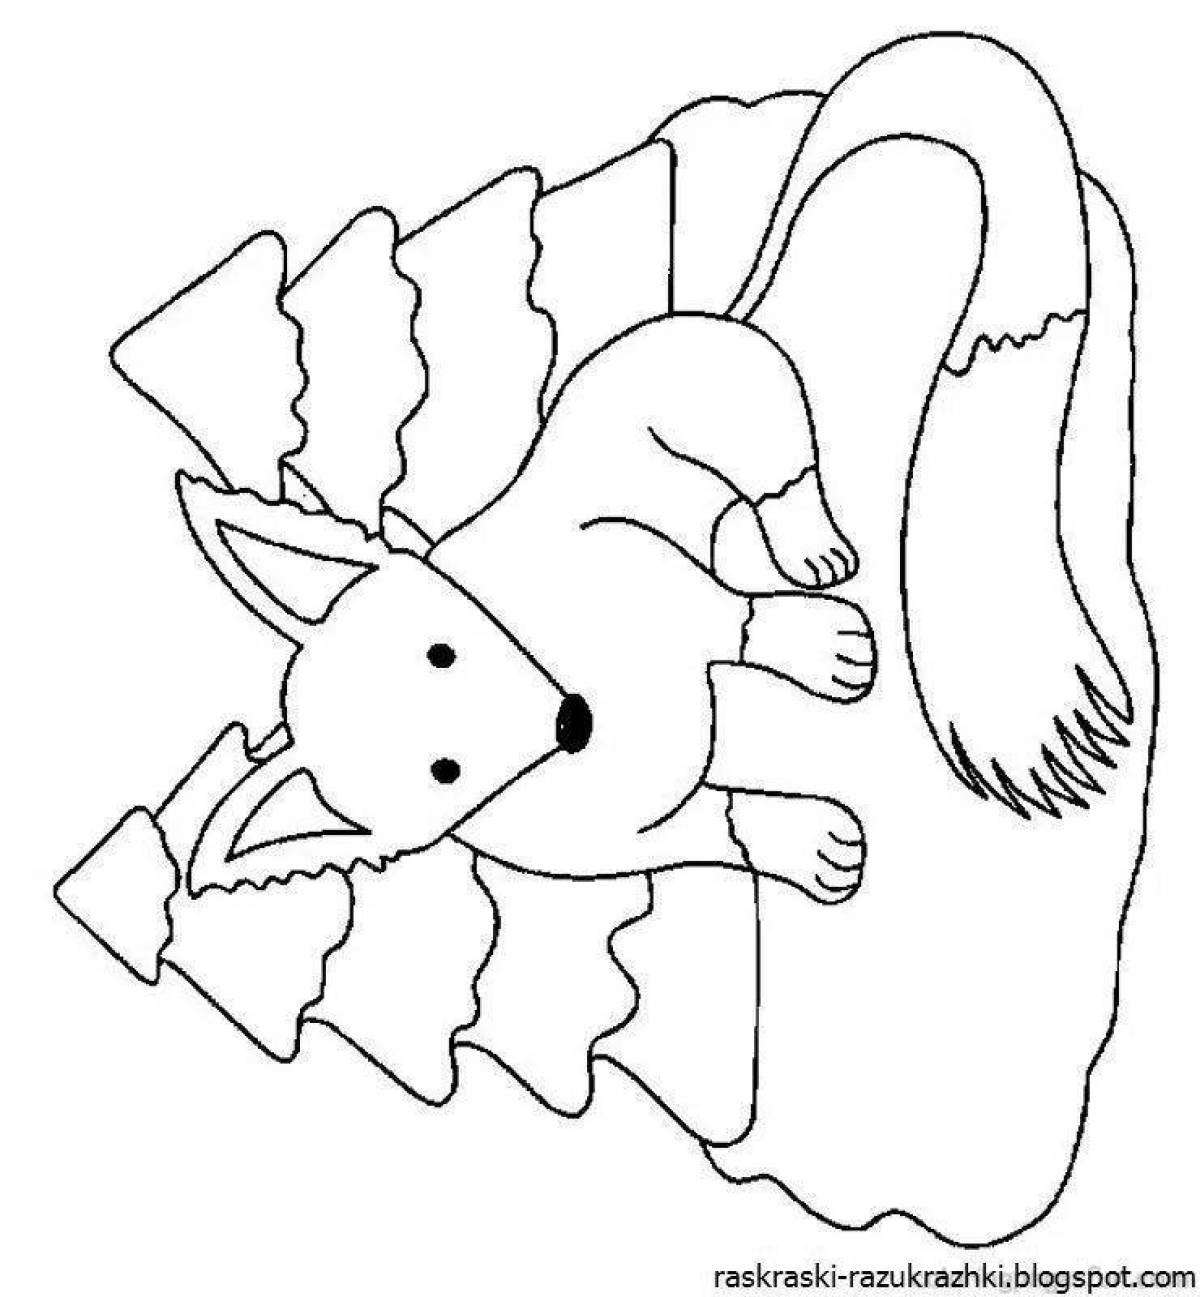 Amazing animal coloring pages for kids in winter